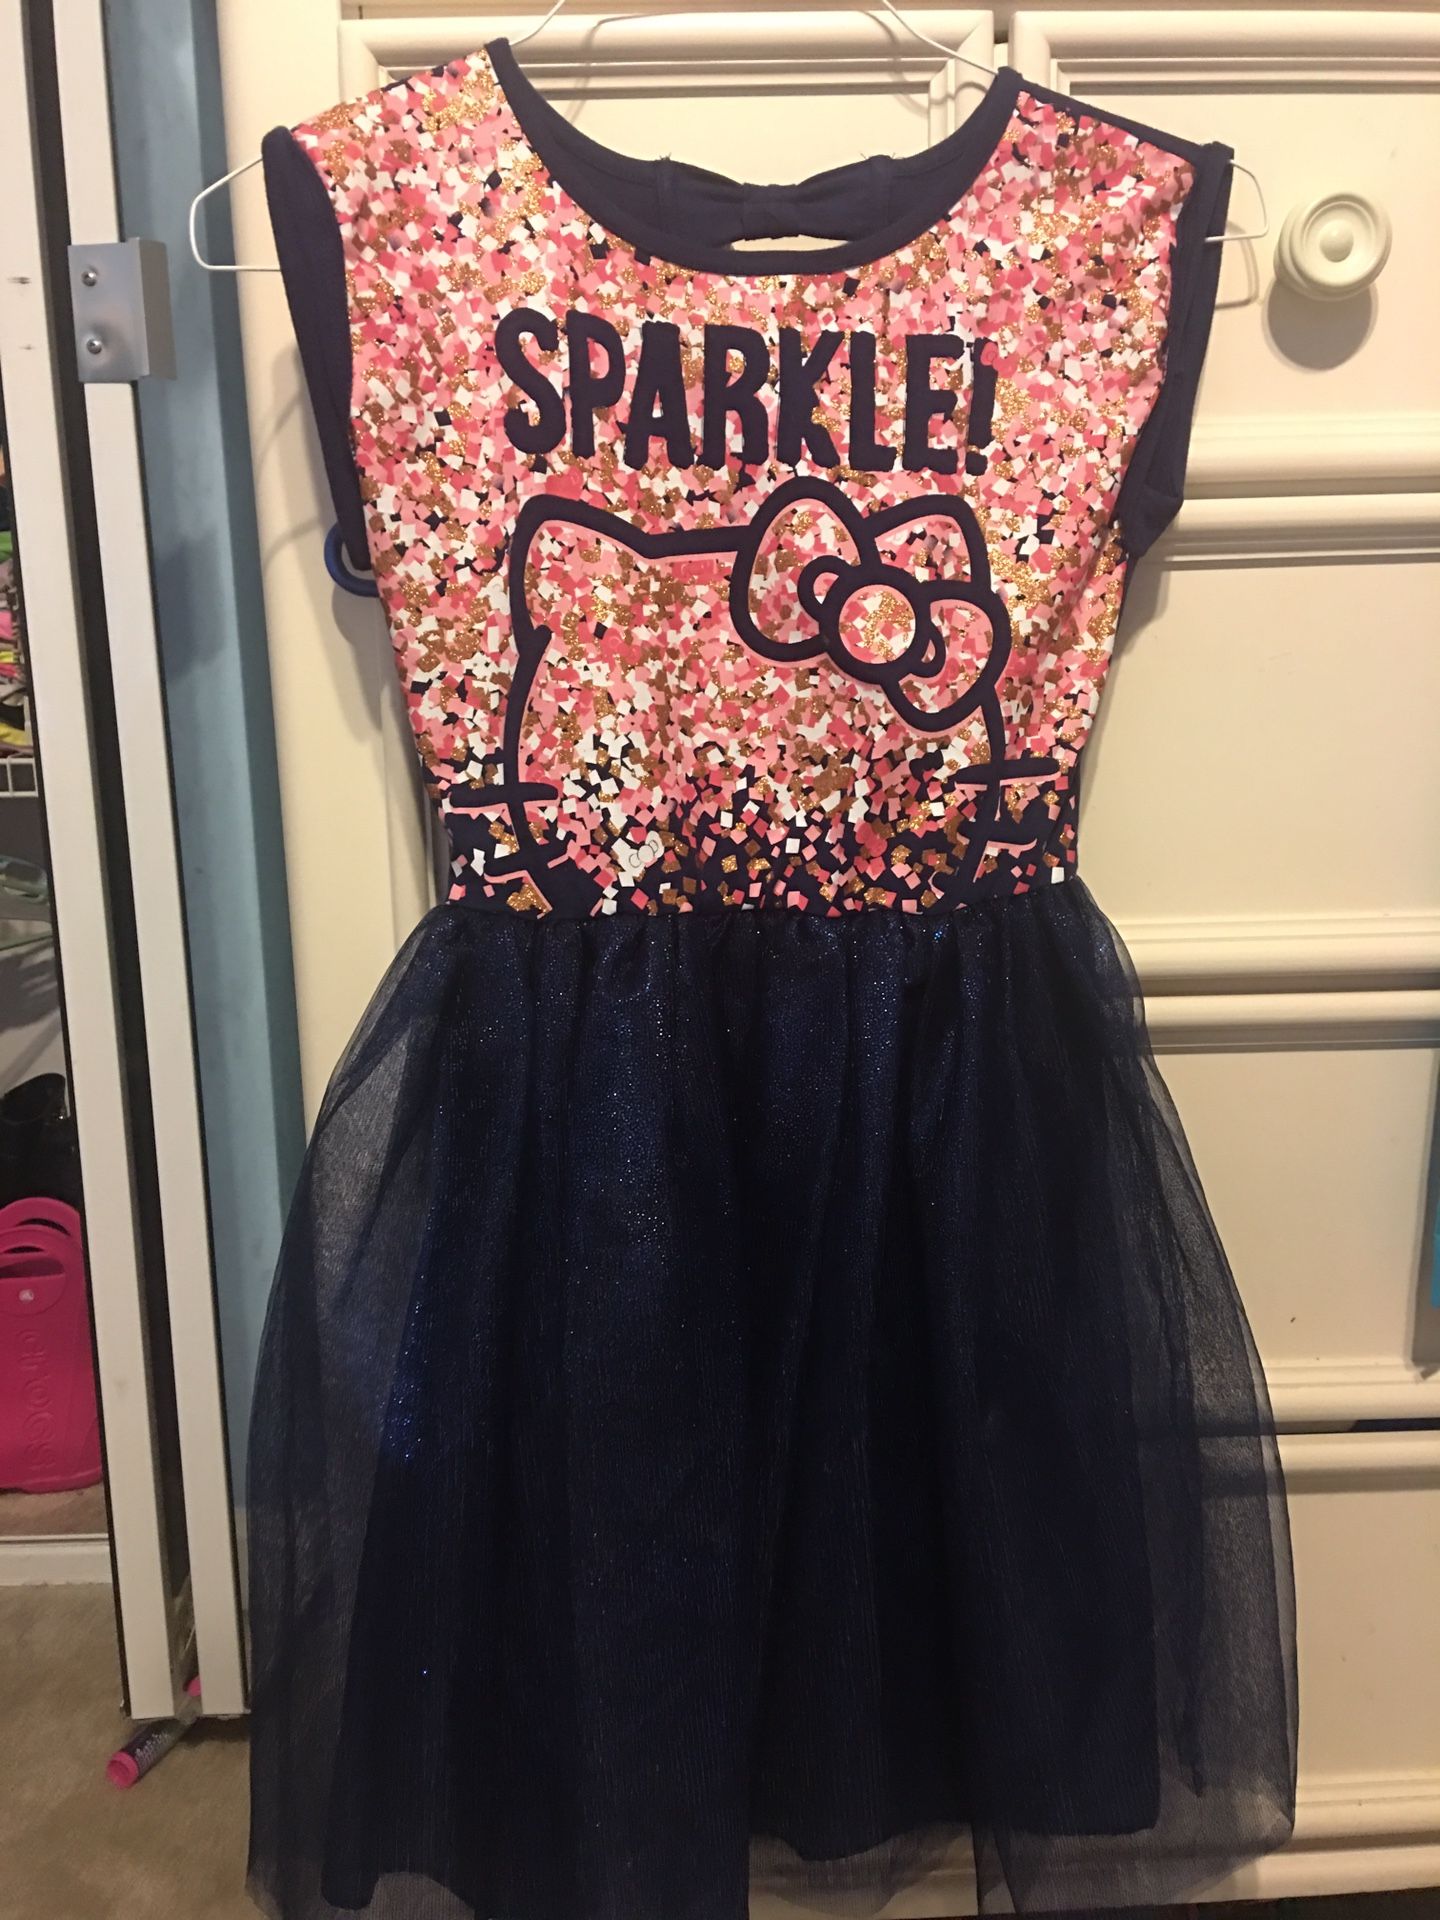 Girls Hello Kitty party dress, size L